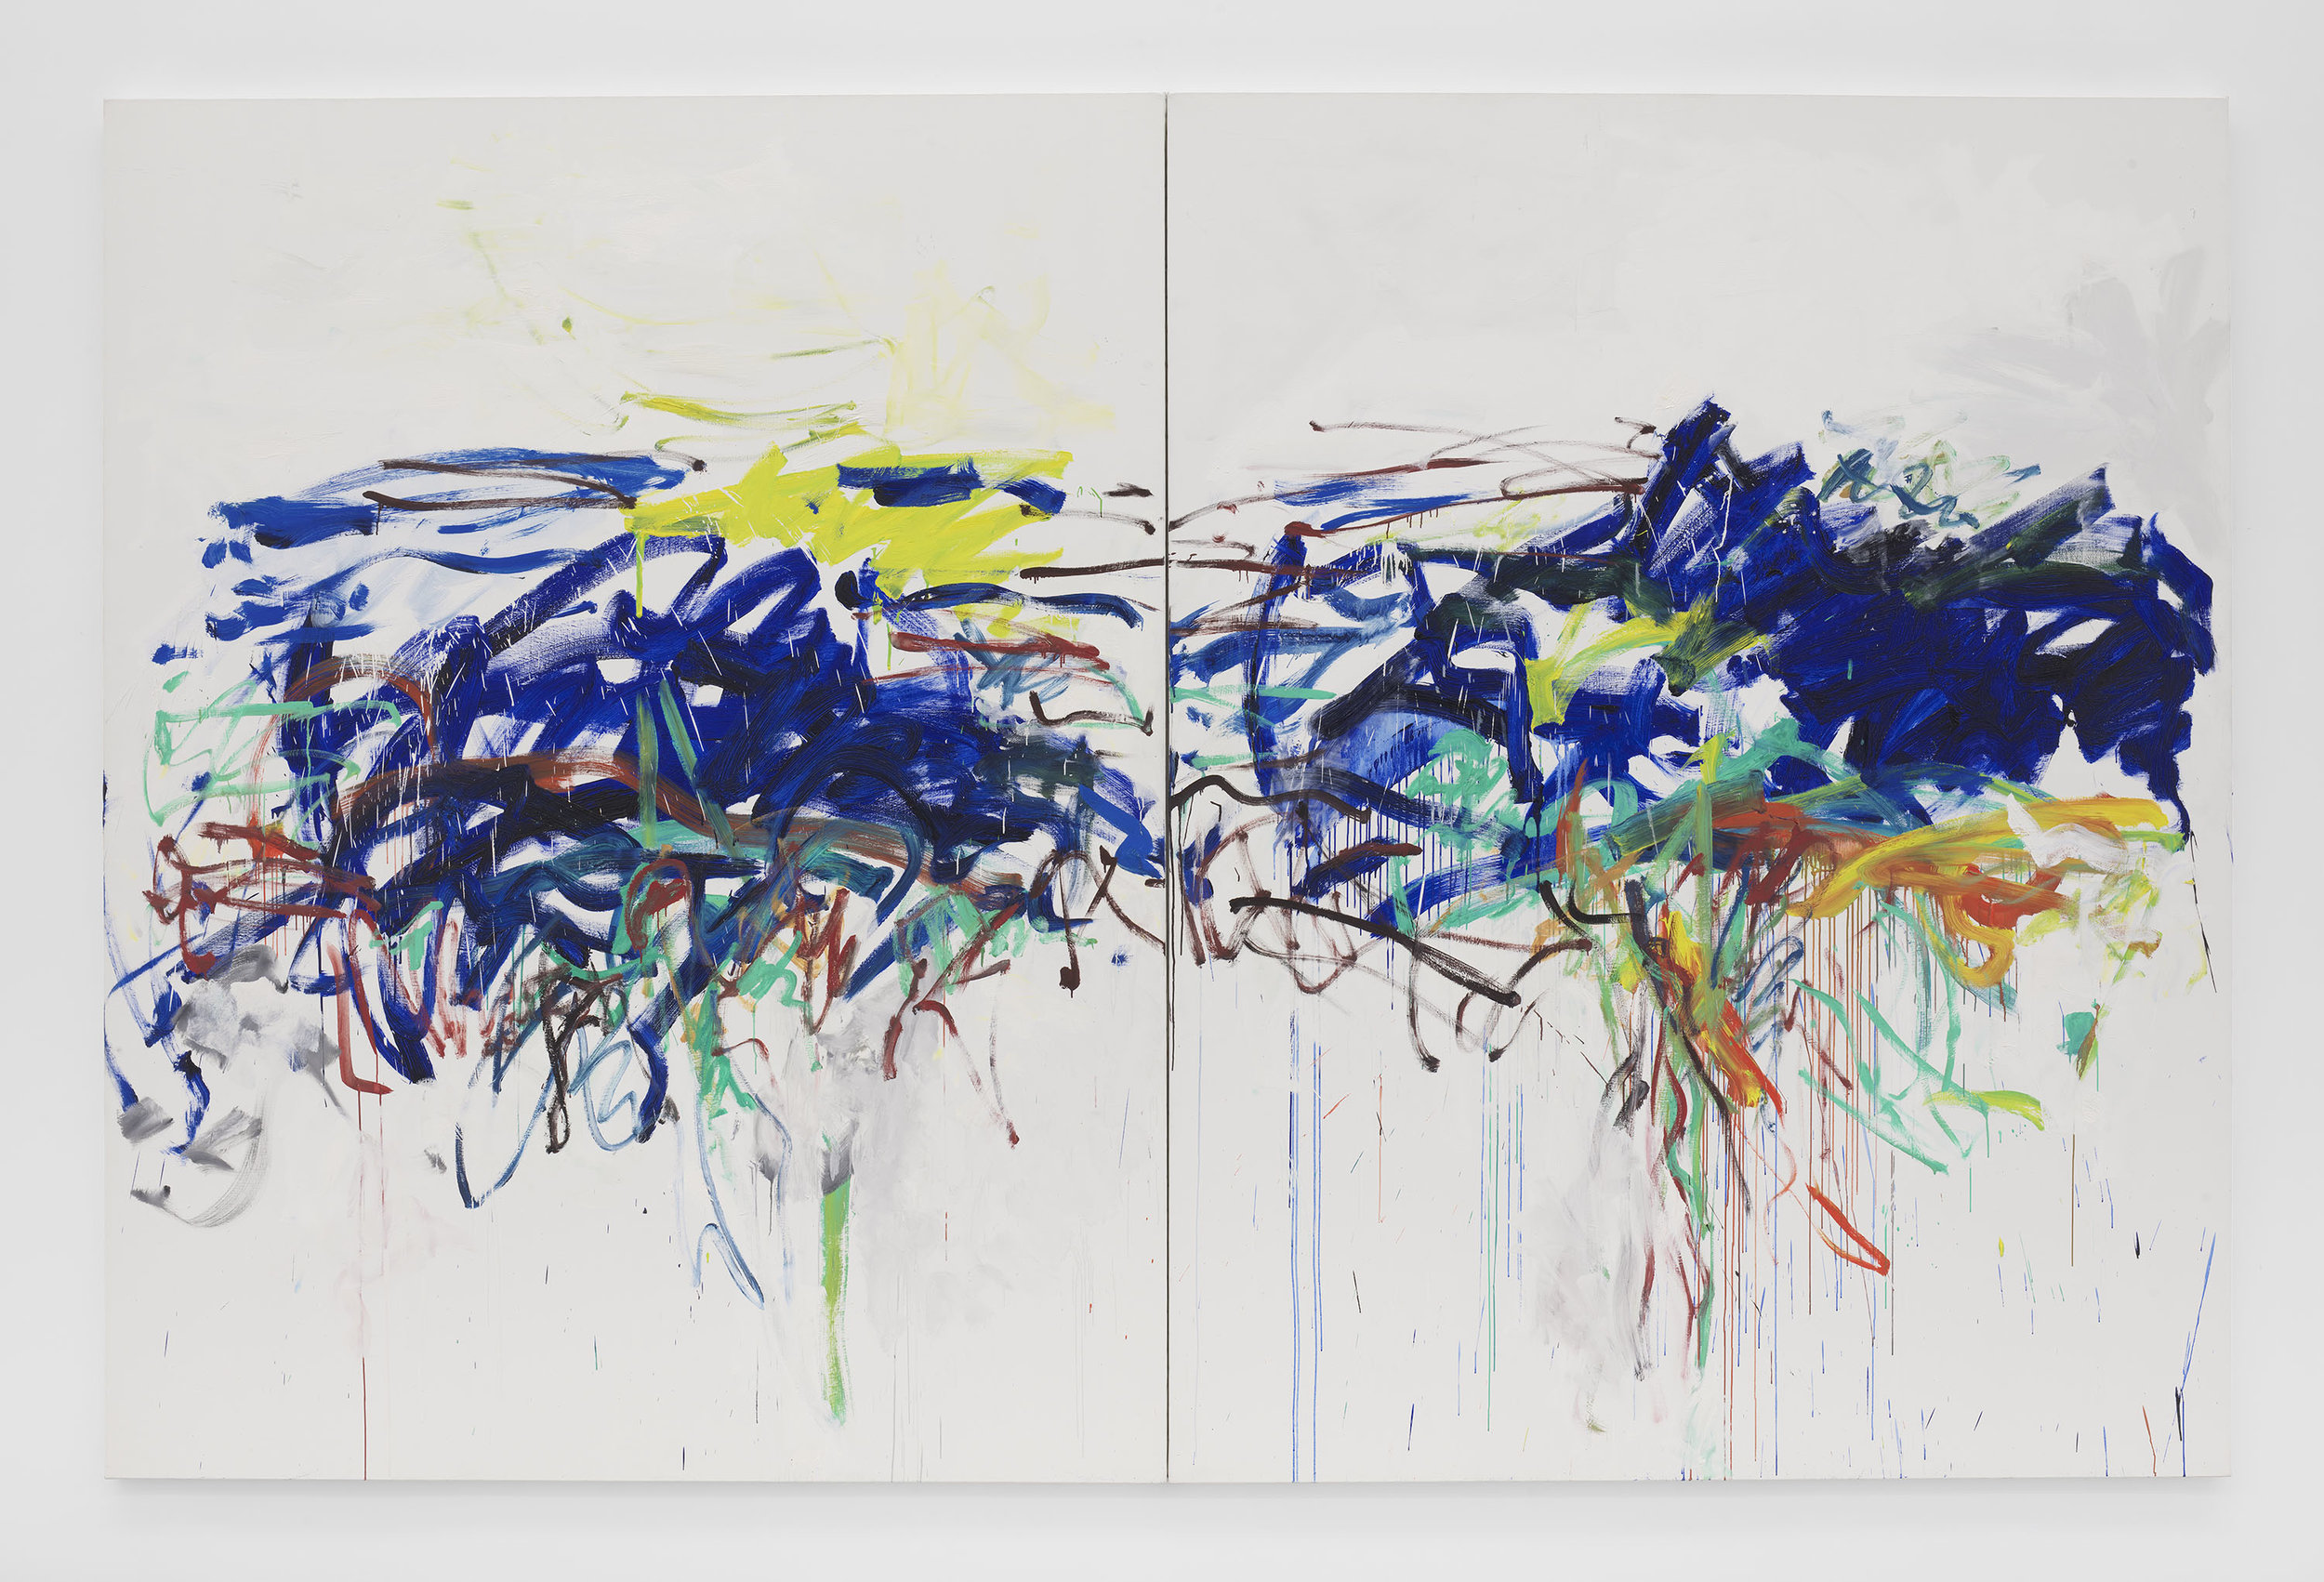   Joan Mitchell ,  Untitled , 1992, Oil on canvas in two (2) parts, 102 3/8 x 157 3/4 inches, 260 x 400.7 cm 